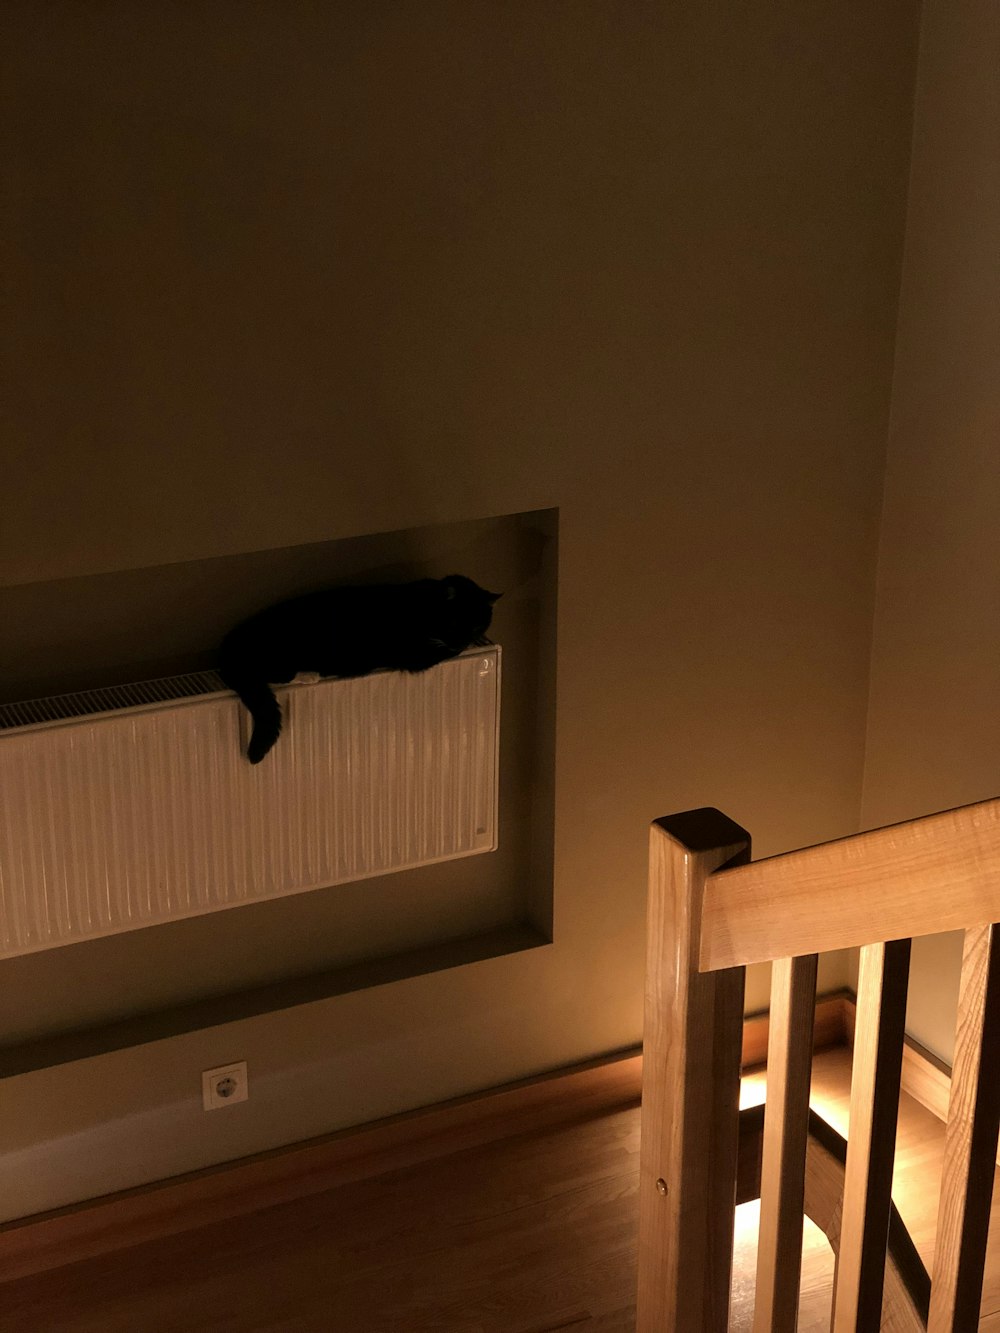 a cat laying on top of a radiator in a room